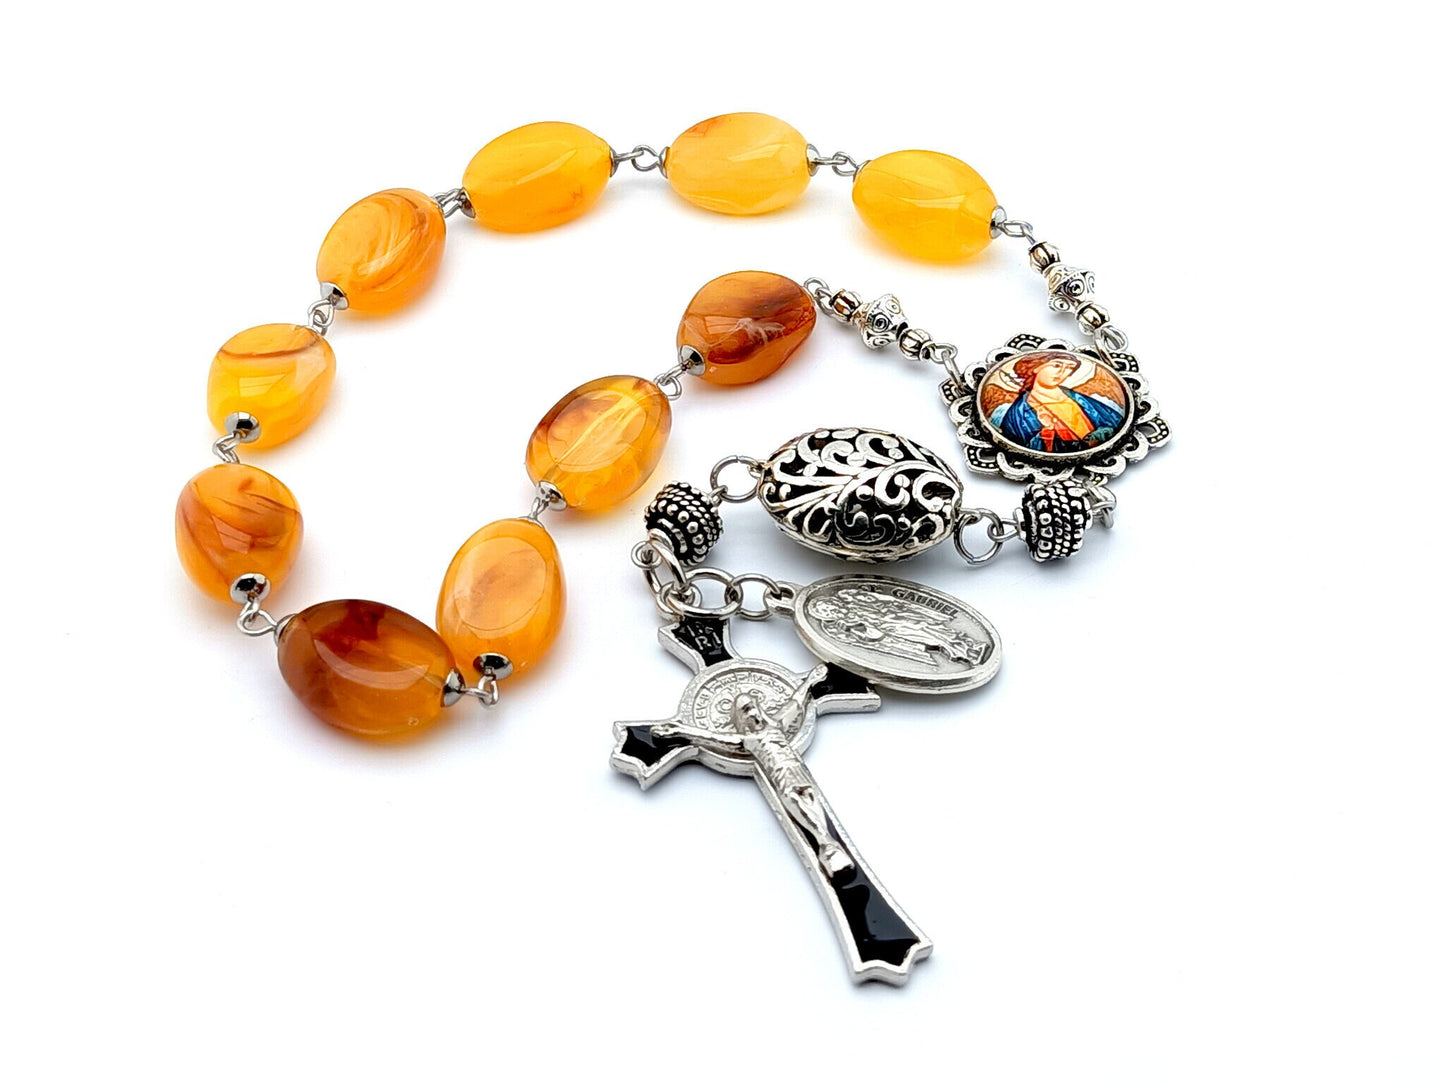 Saint Gabriel unique rosary beads single decade rosary with amber gemstone beads, silver and black enamel crucifix and picture centre medal.